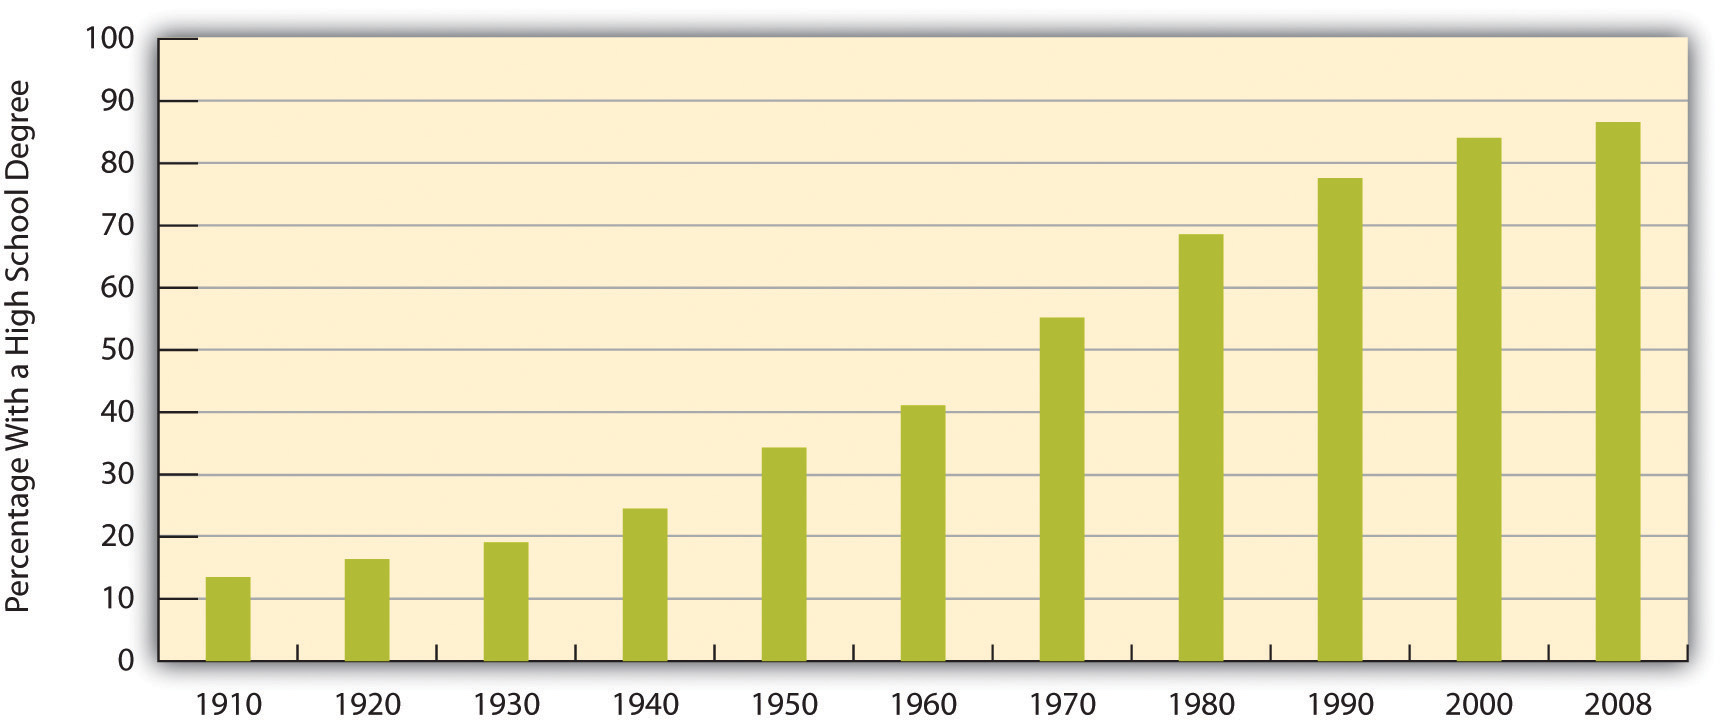 Percentage of Population 25 or Older With at Least a High School Degree, 1910-2008